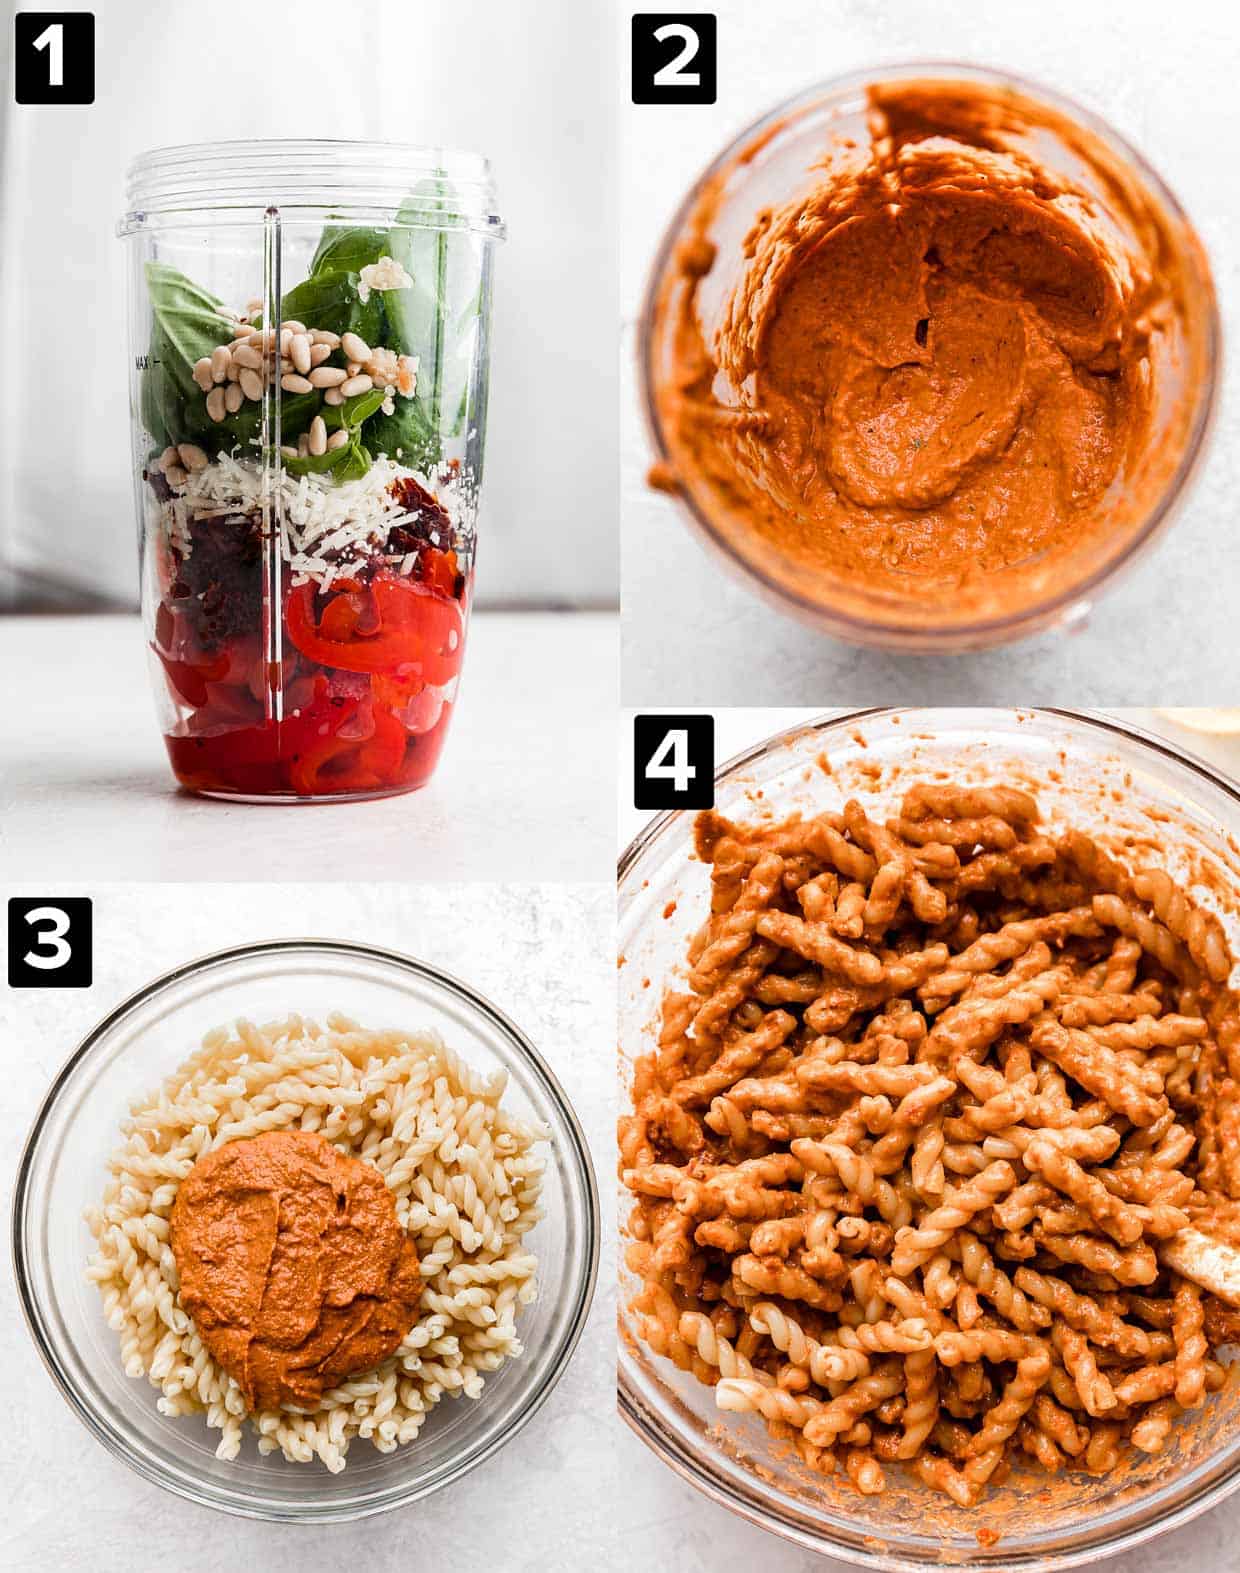 Four photos showing how to make Red Pesto Pasta: ingredients in a blender, red pesto pasta pureed, the red pesto pasta over noodles, and noodles mixed with the pesto.